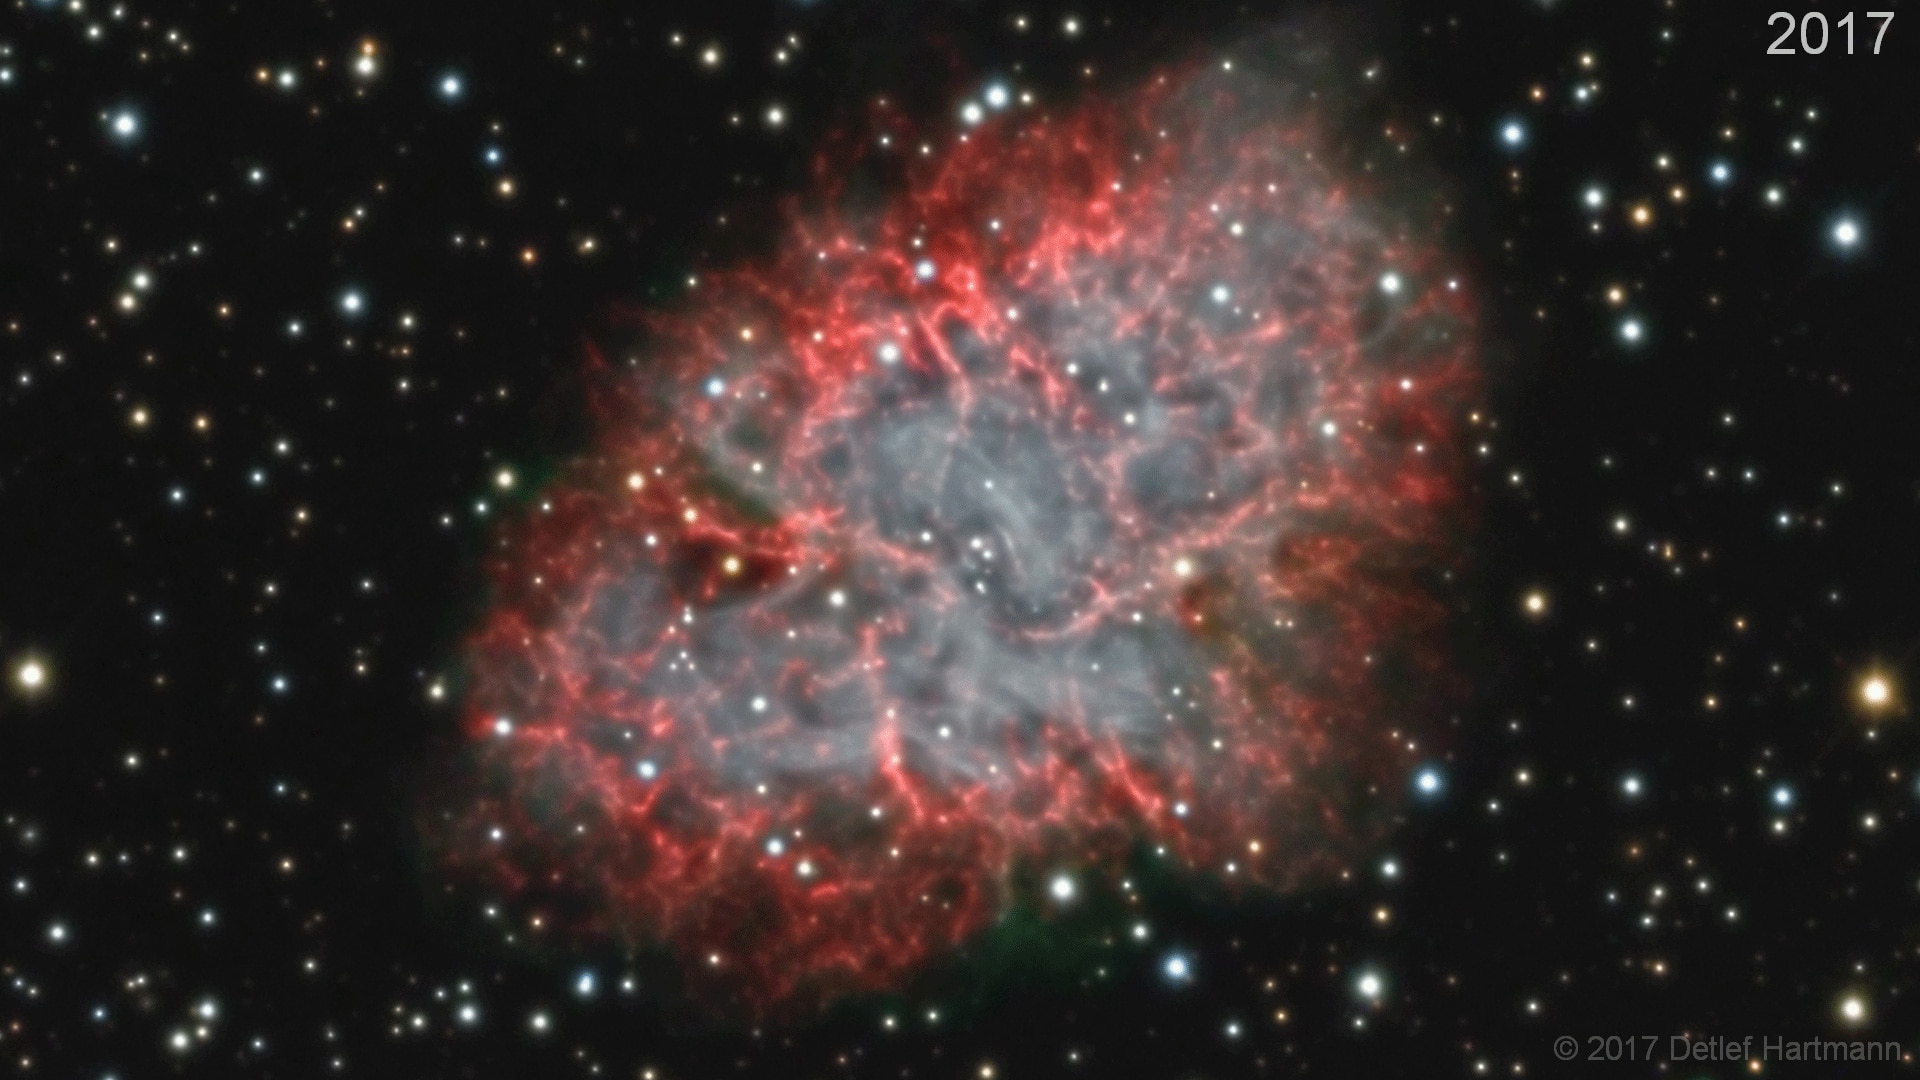 One frame from the ten-year animation of the Crab Nebula showing its expansion. Credit: Detlef Hartmann